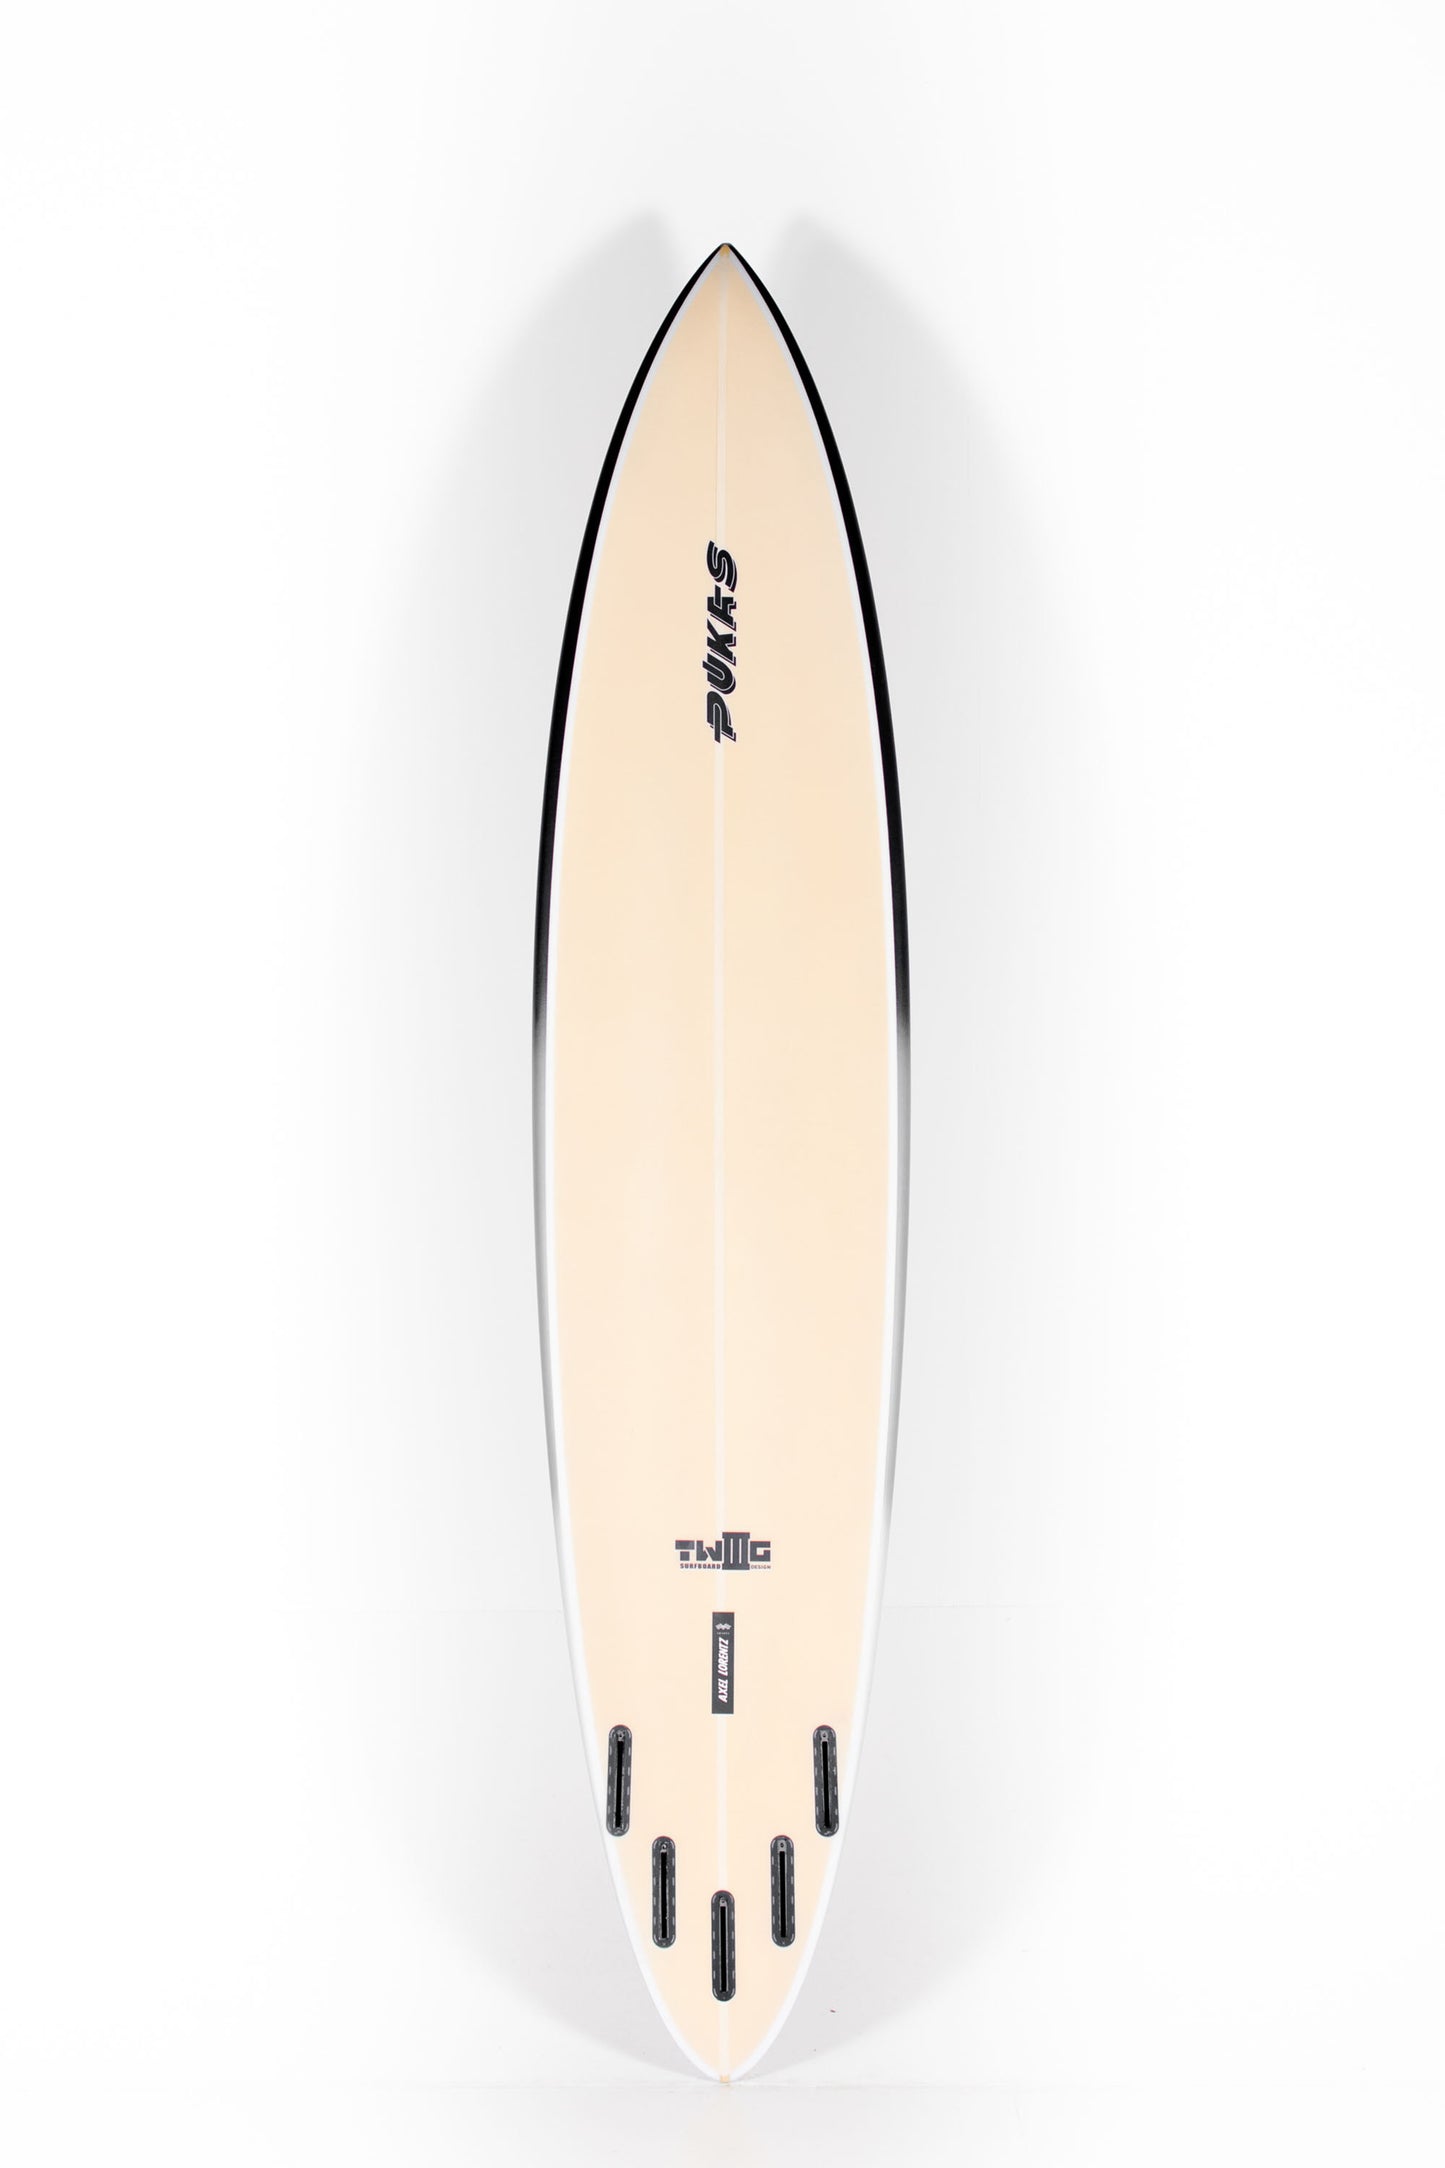 Pukas Surf Shop - Pukas Surfboard - TWIG CHARGER by Axel Lorentz - 8´6” x 20 5/8 x 3 3/8 - 60L  AX06031